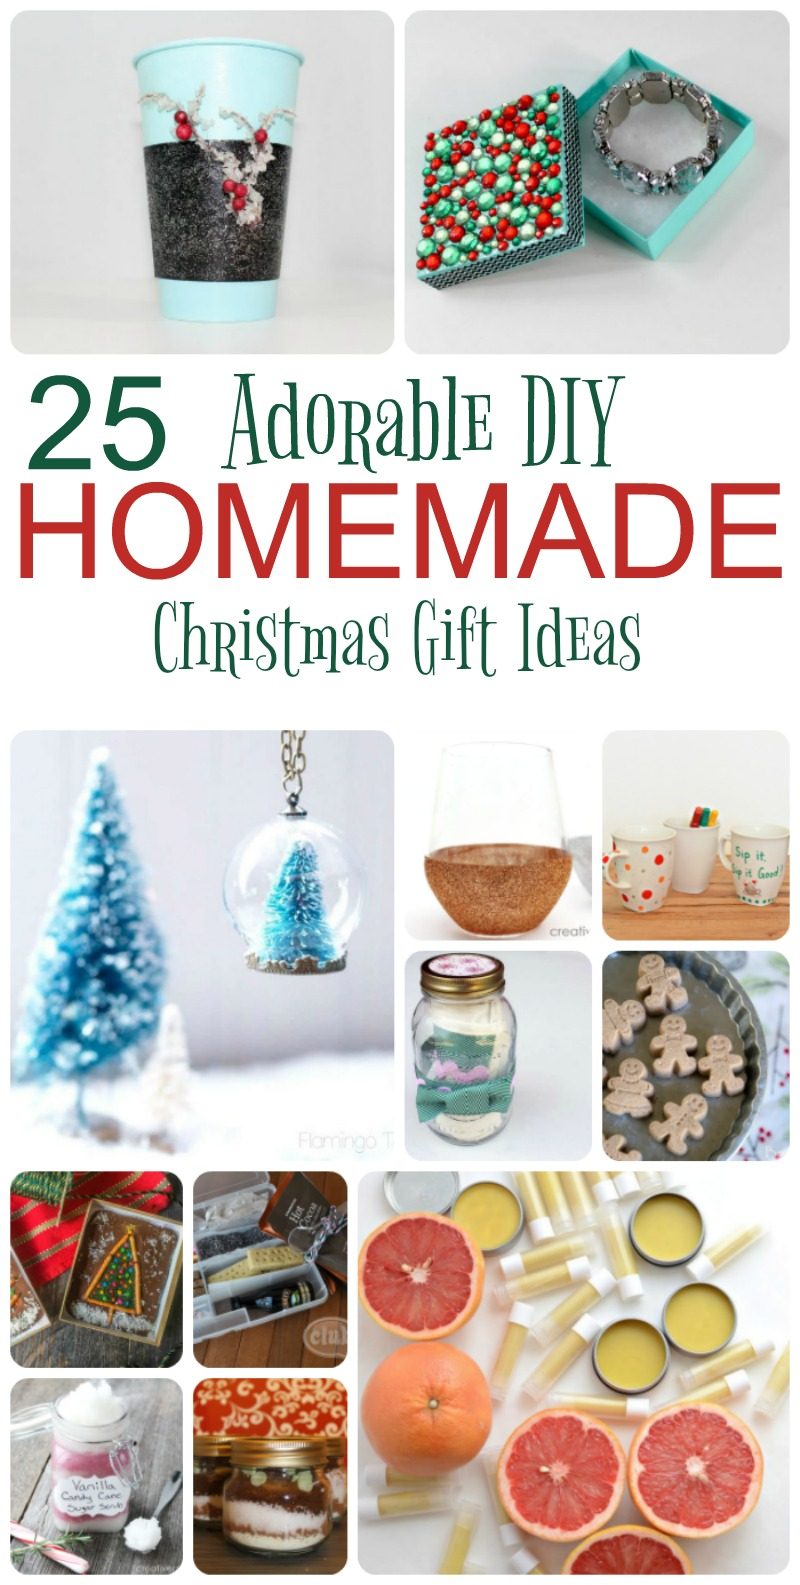 Want to save money and give a super meaningful gift this holiday season? Check out these 25 homemade gift ideas! With ideas for both kids and adults to make, there's something for every crafting skill level!